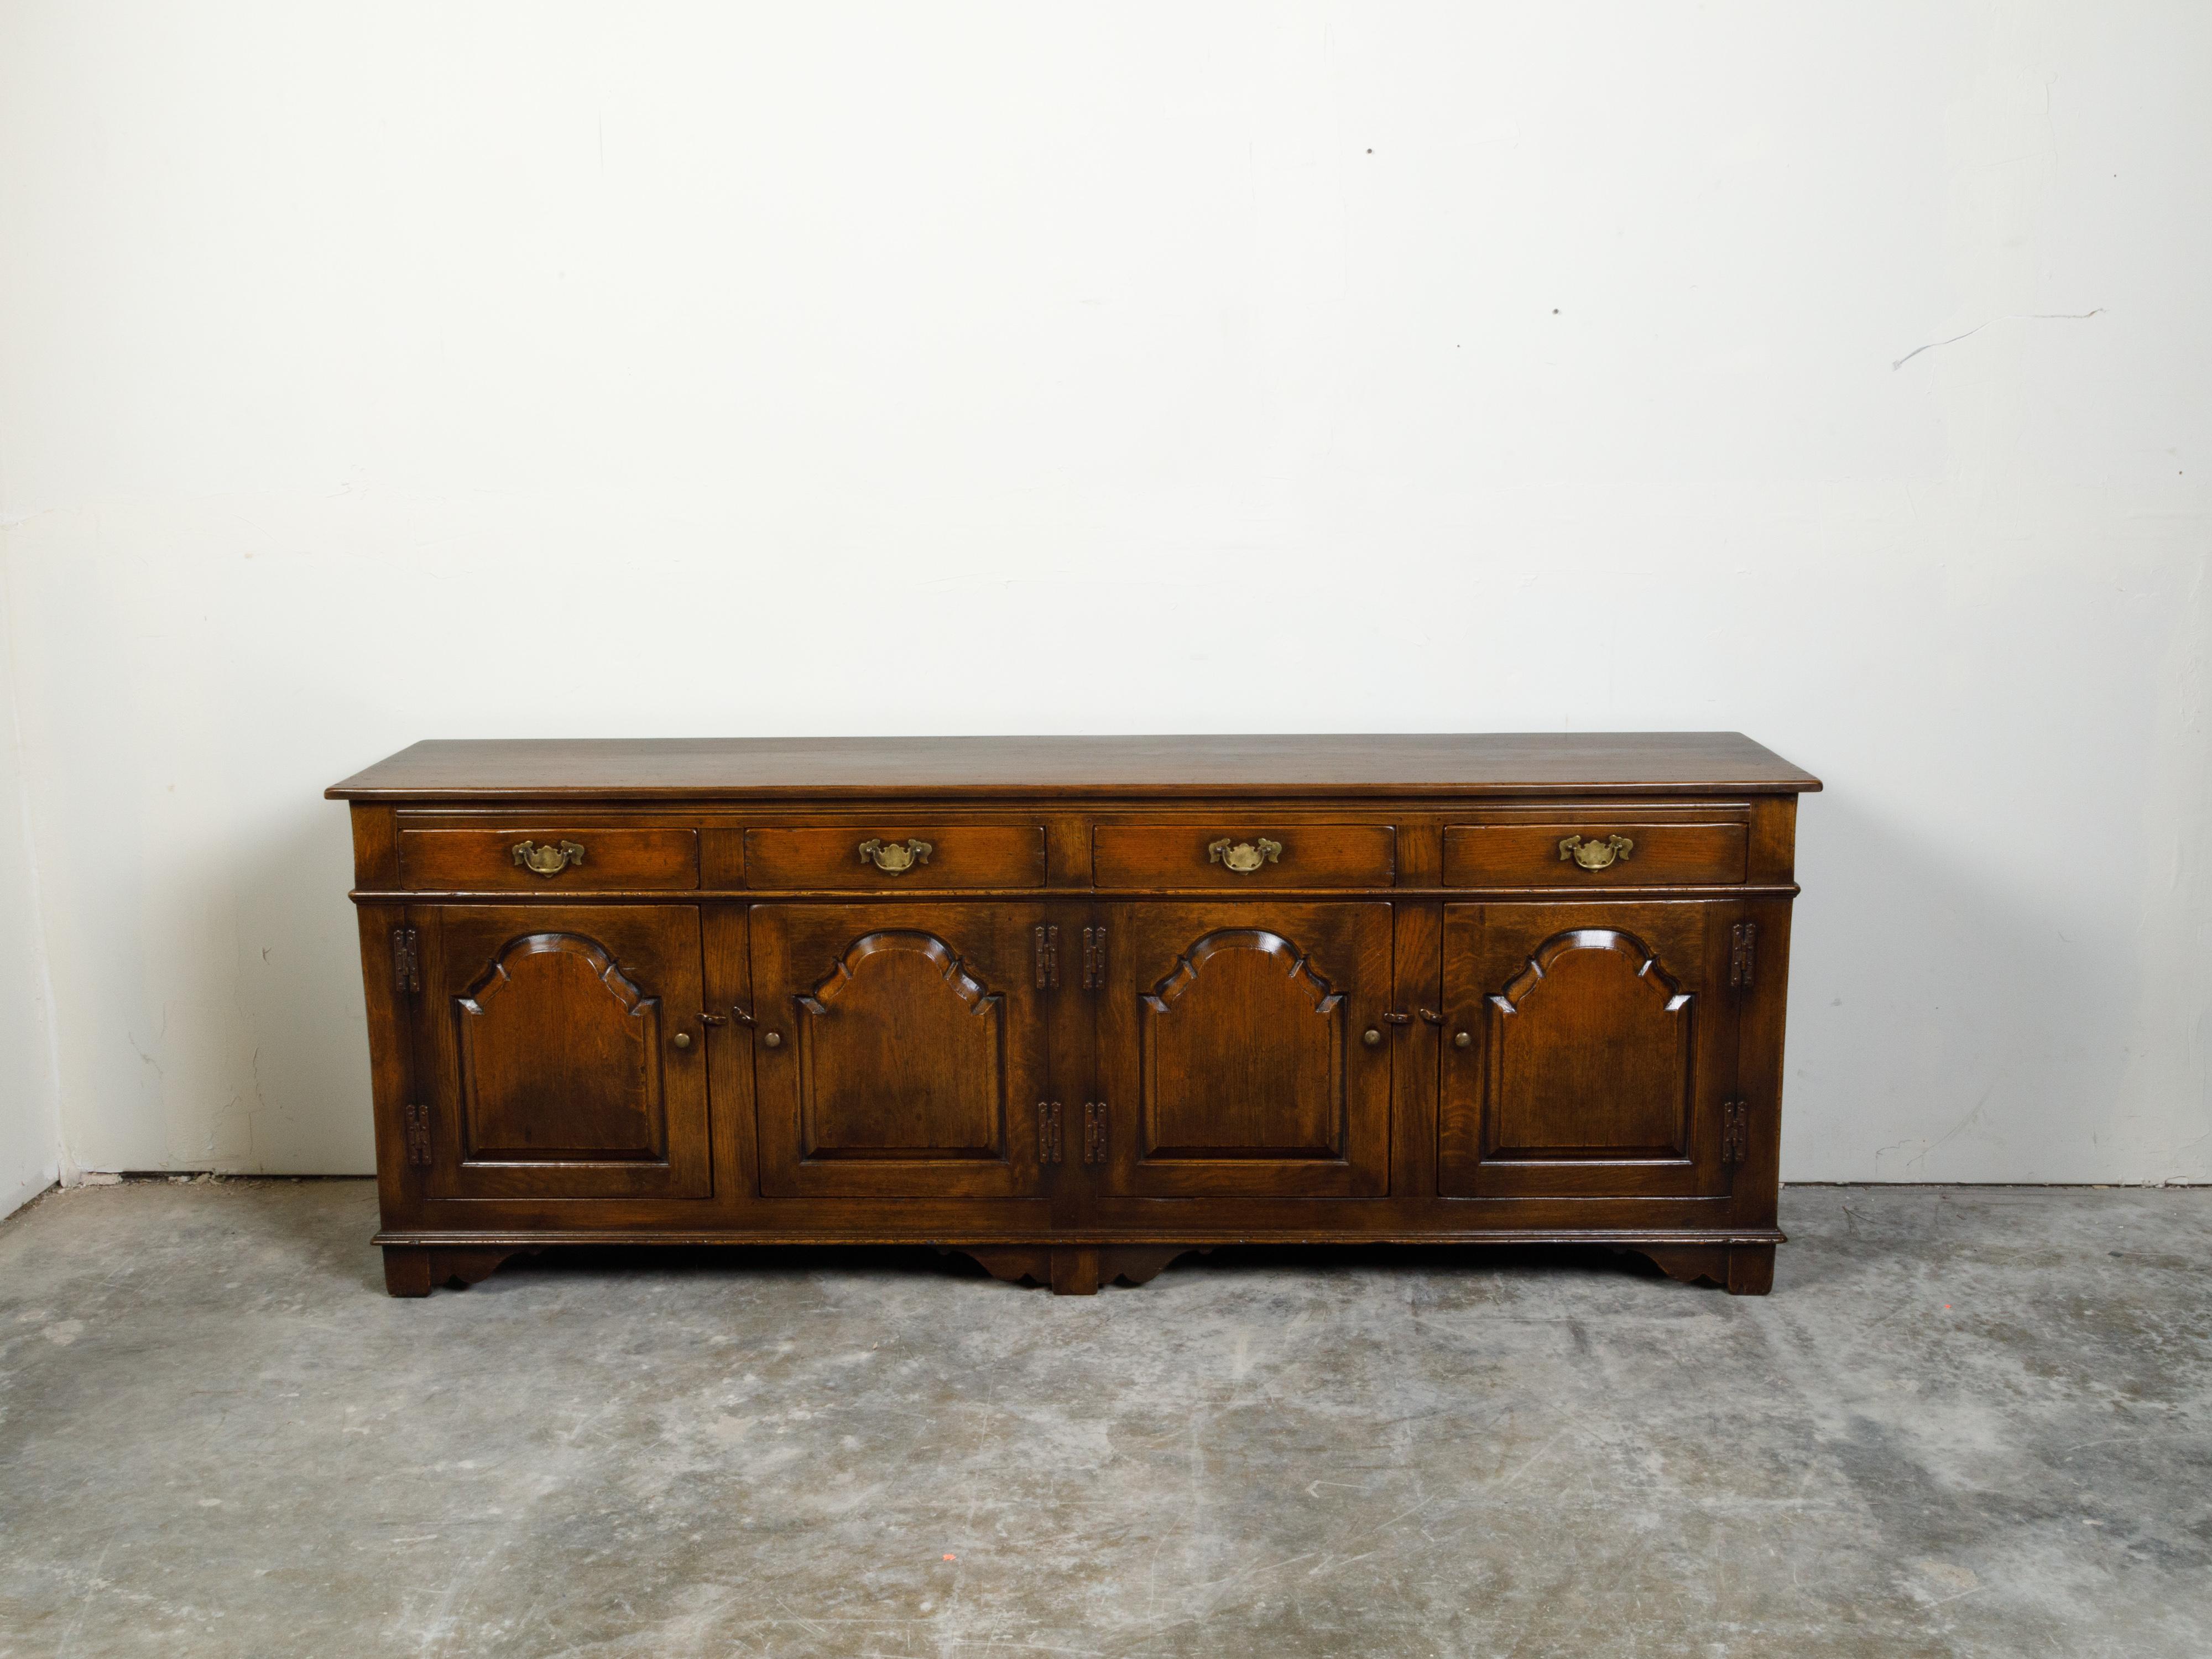 An English oak enfilade from the mid 20th century, with four drawers over four doors. Created in England during the midcentury period, this oak enfilade features a rectangular top sitting above four drawers fitted with brass Chippendale style